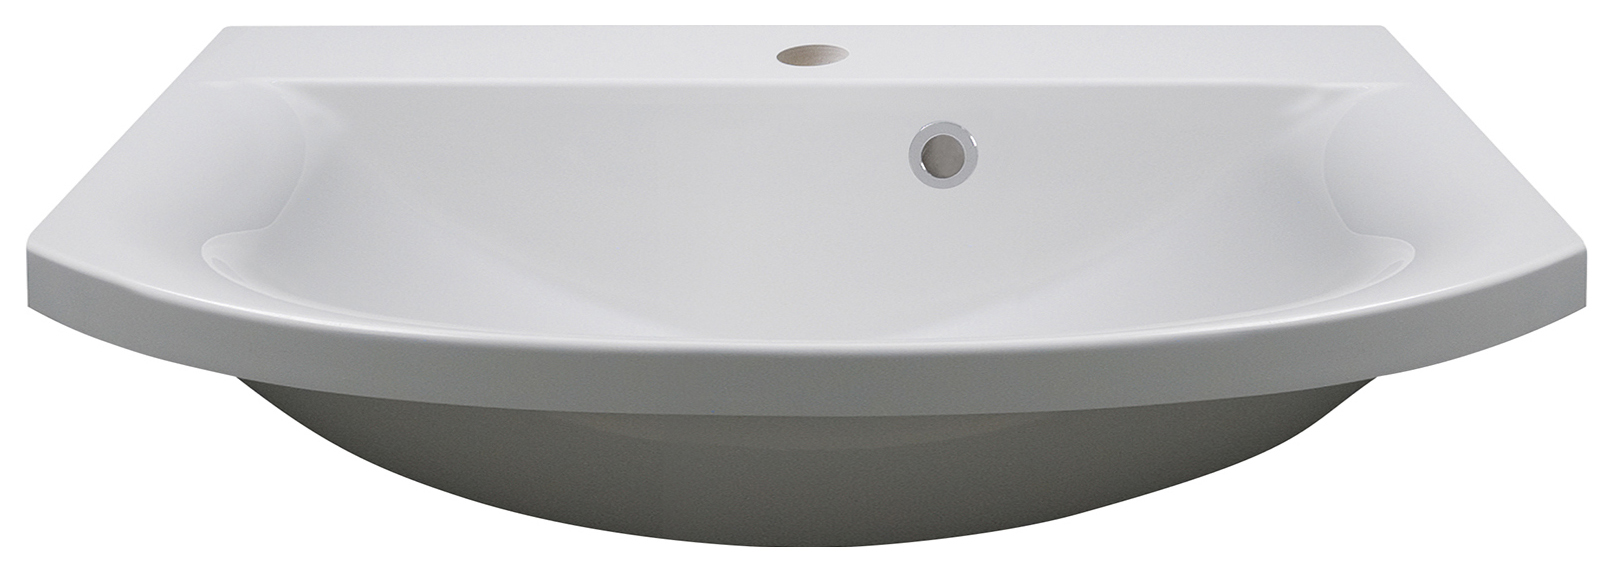 Image of Duarti By Calypso Belmont Semi Recessed Cast Marble Basin - 600mm